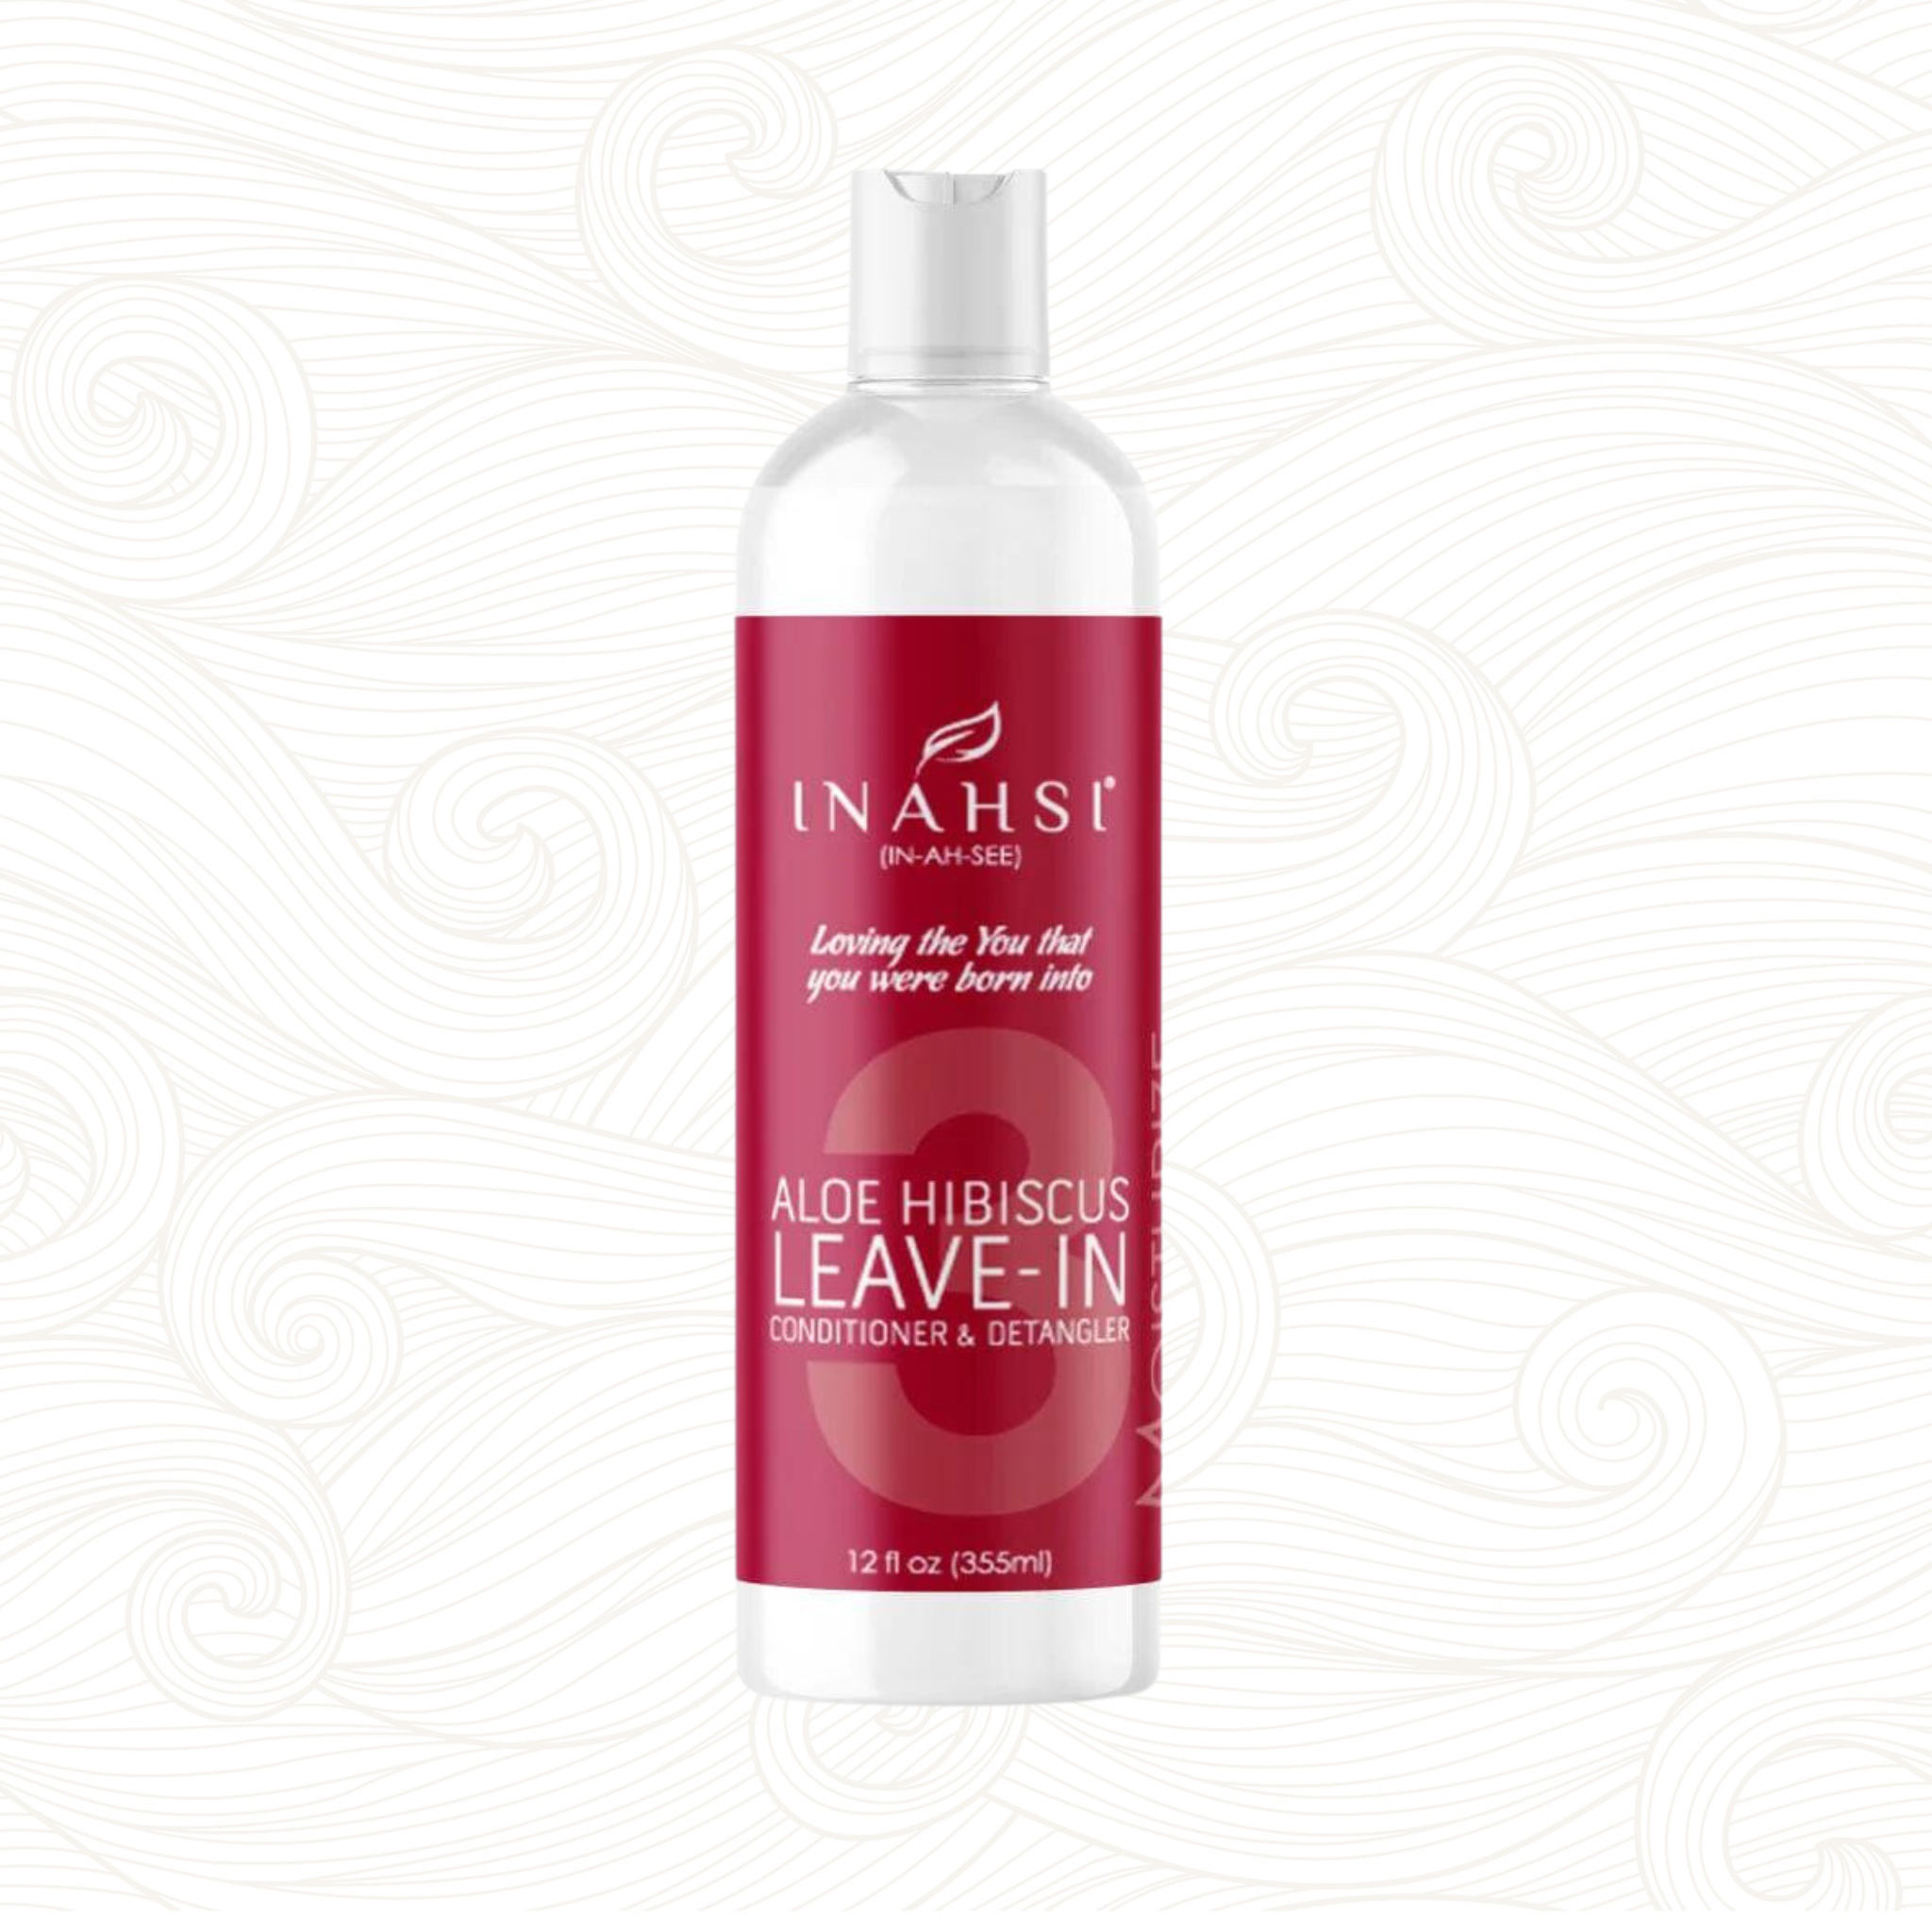 Inahsi | Leave-in Conditioner & Detangler /ab 59ml Leave-In Inahsi